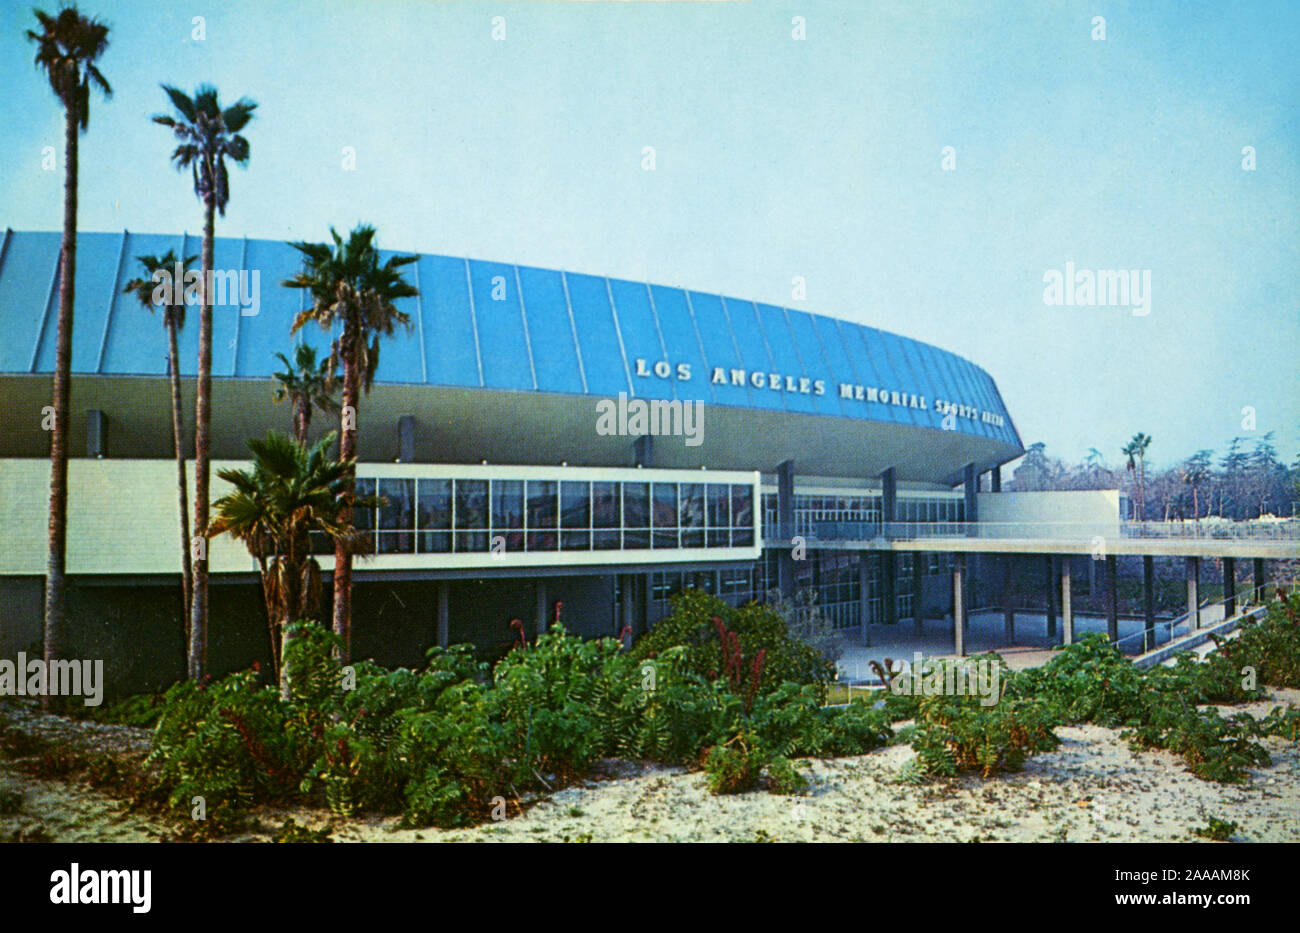 The Los Angeles Memorial Sports Arena was once the home of the NBA L.A. Clippers, other sports teams and many classic rock concerts including memorable perfromances by Pink Floyd and Bruce Springsteen. The building no longer stands. Stock Photo